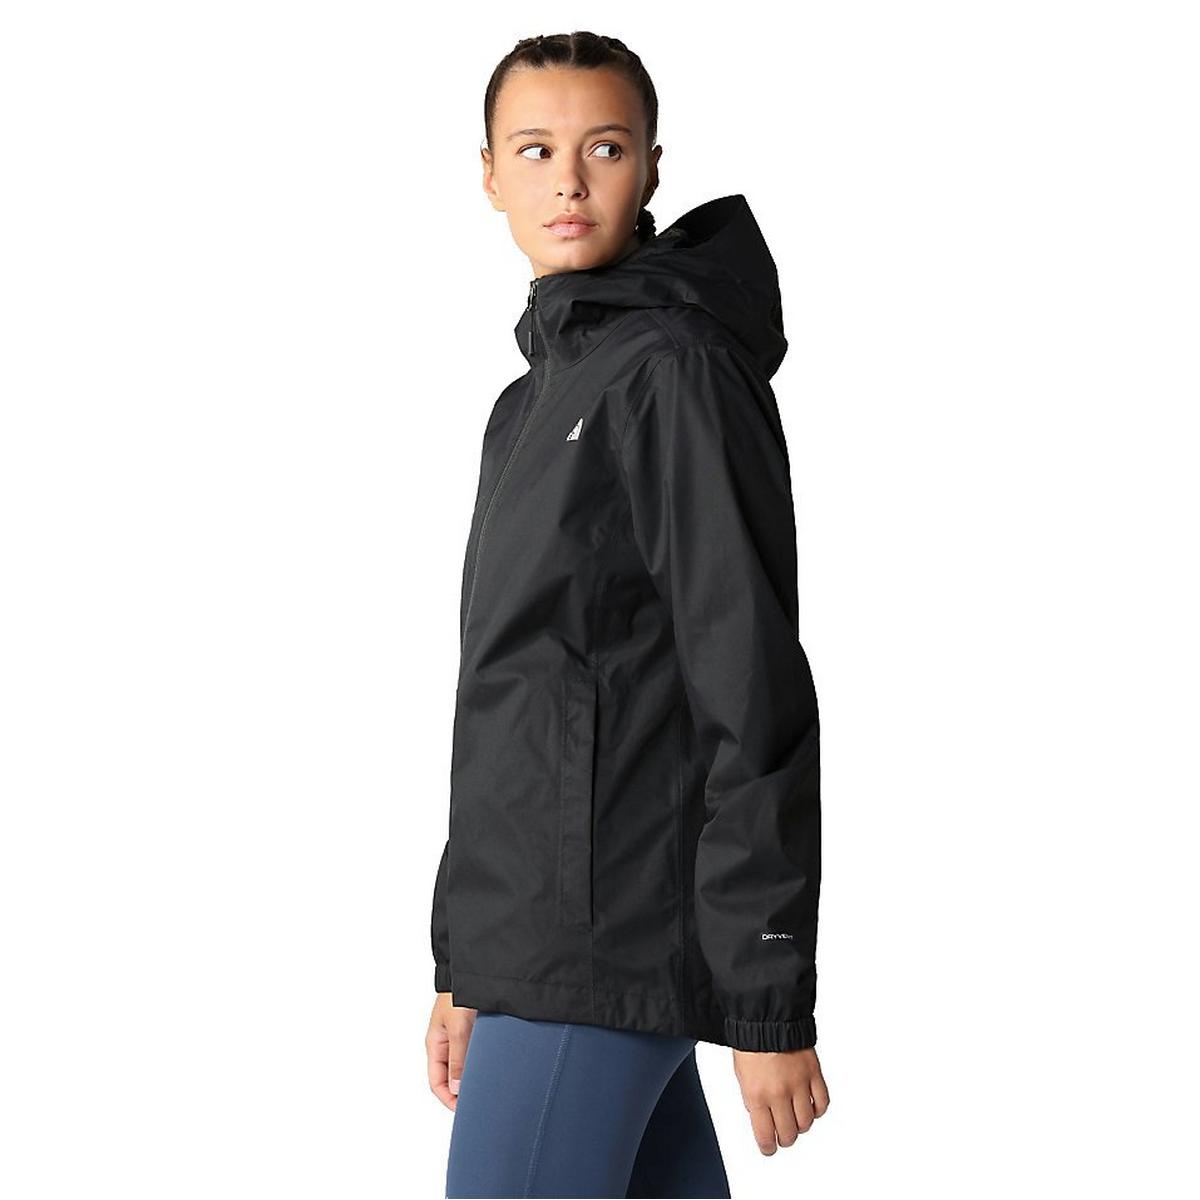 The North Face Women's Quest Jacket - Black